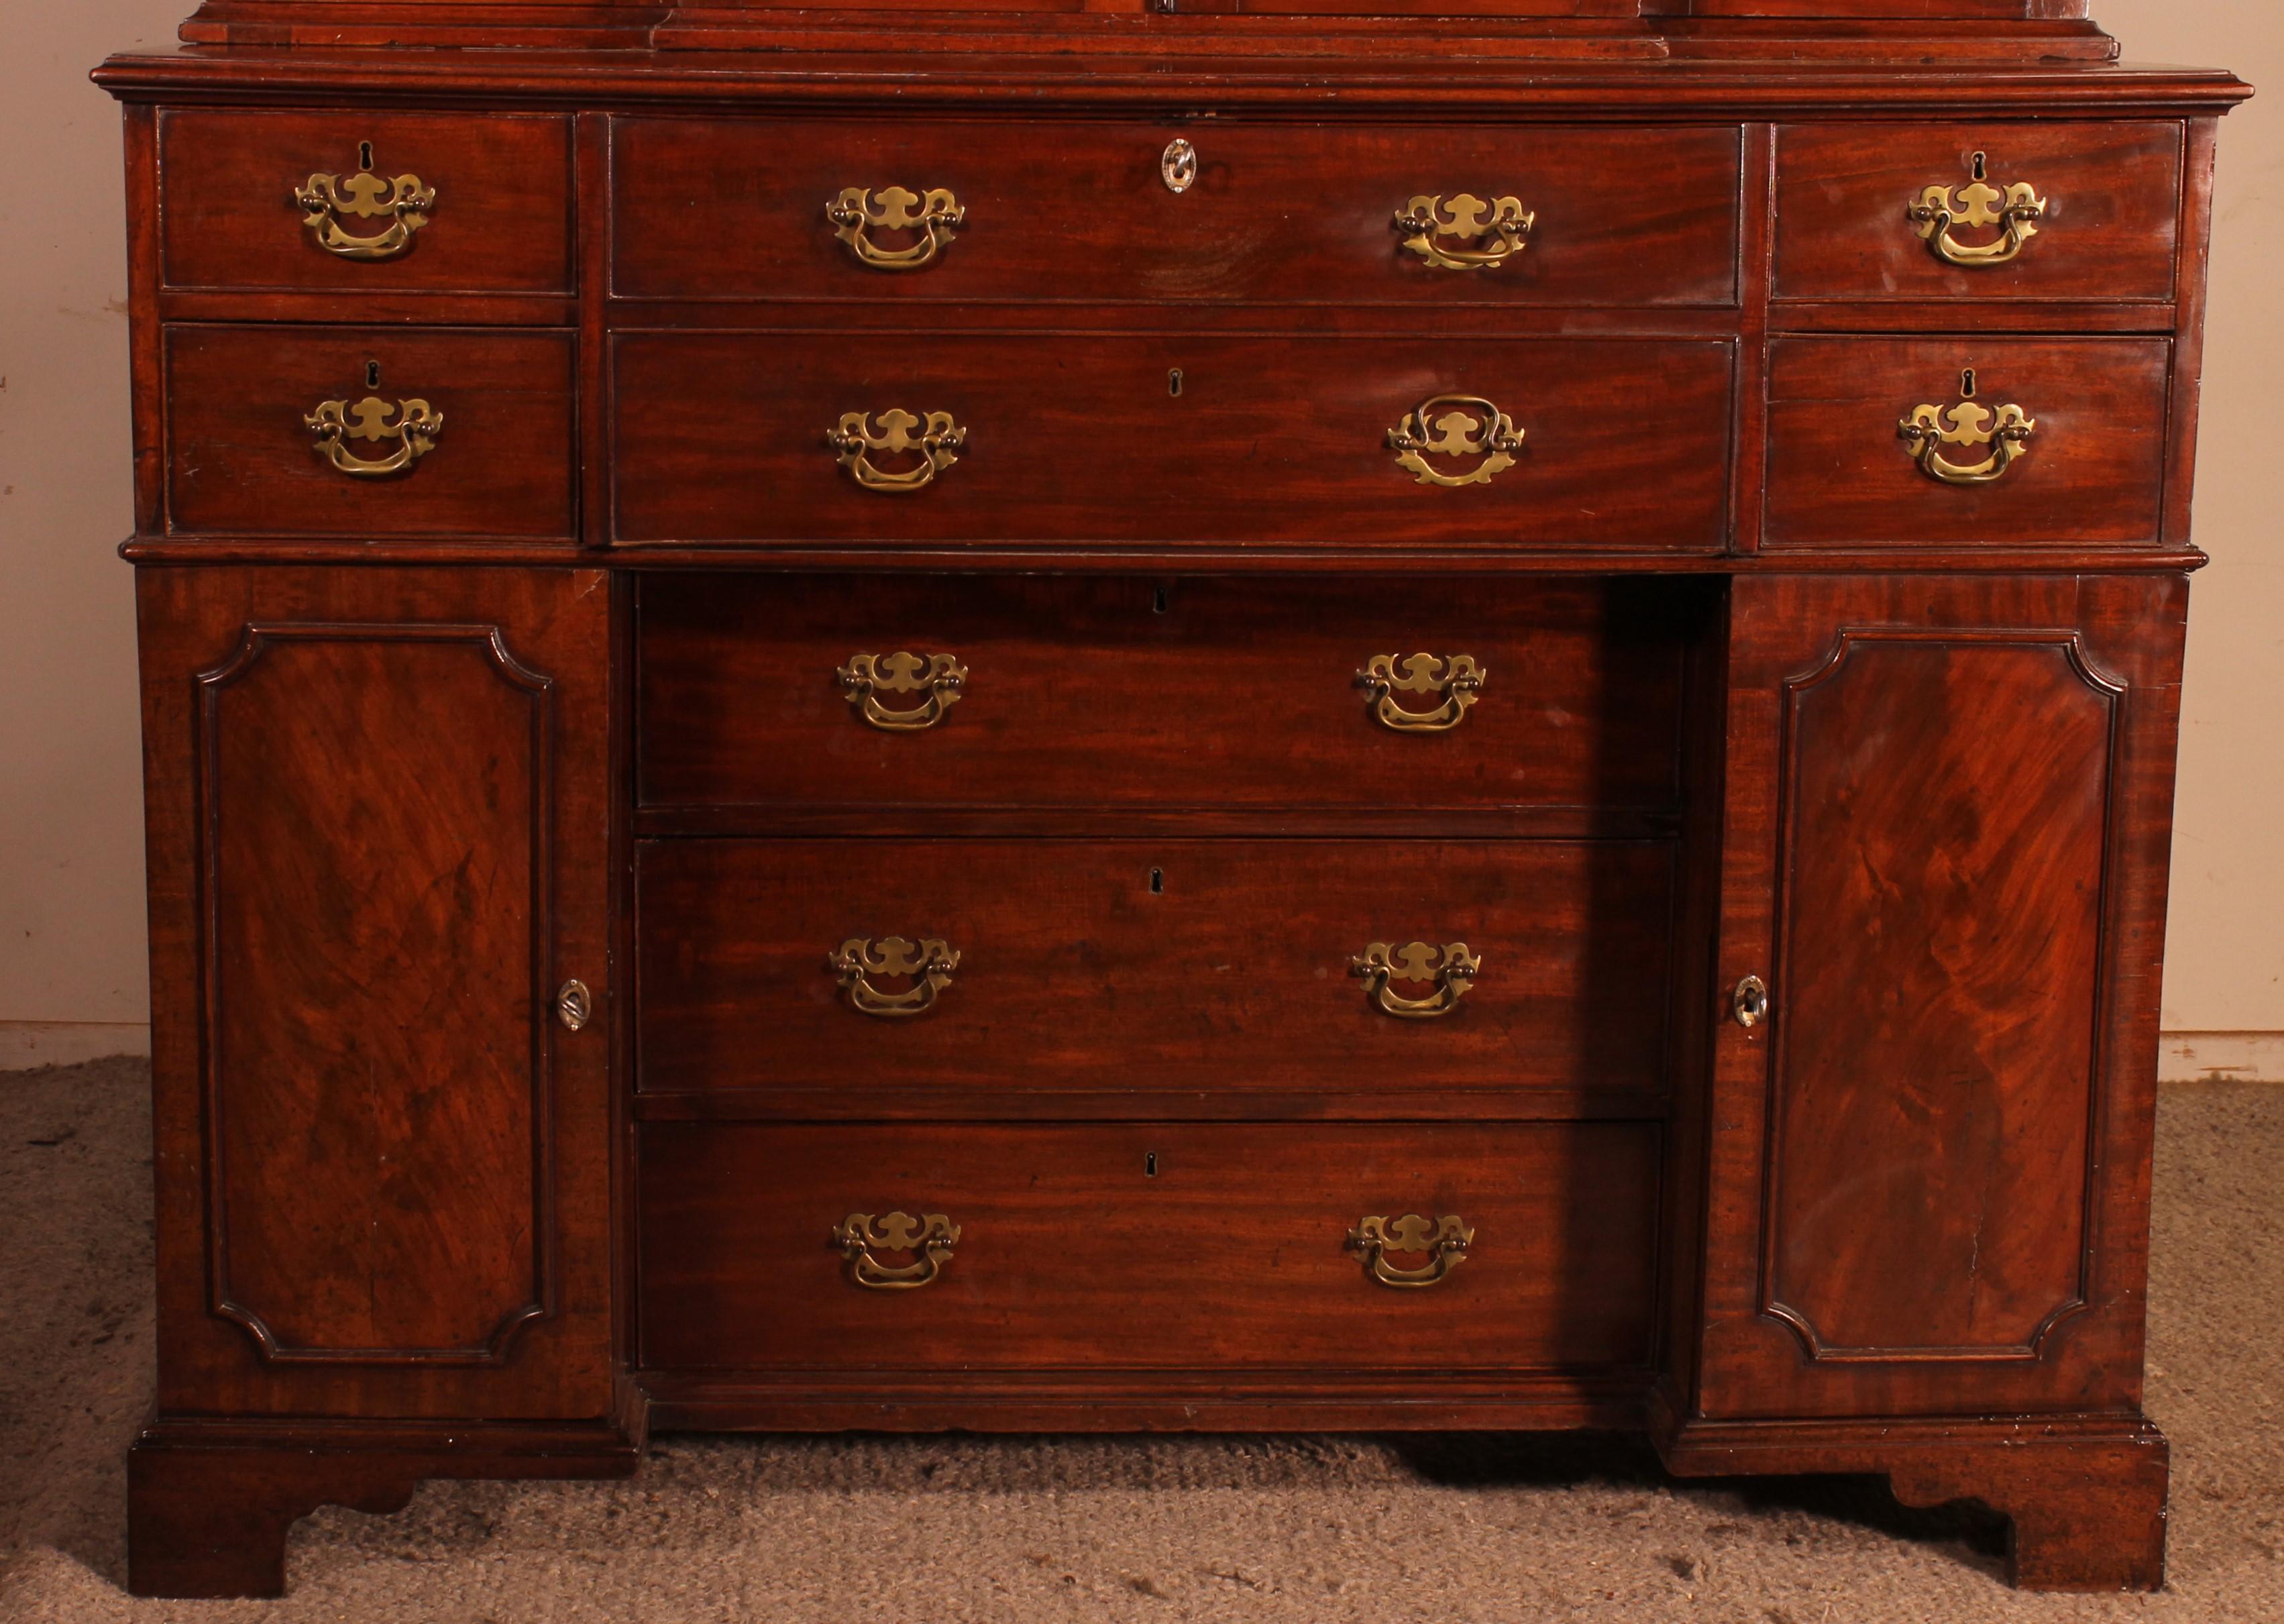 British Mahogany Showcase Cabinet Or Library From The 18th Century For Sale